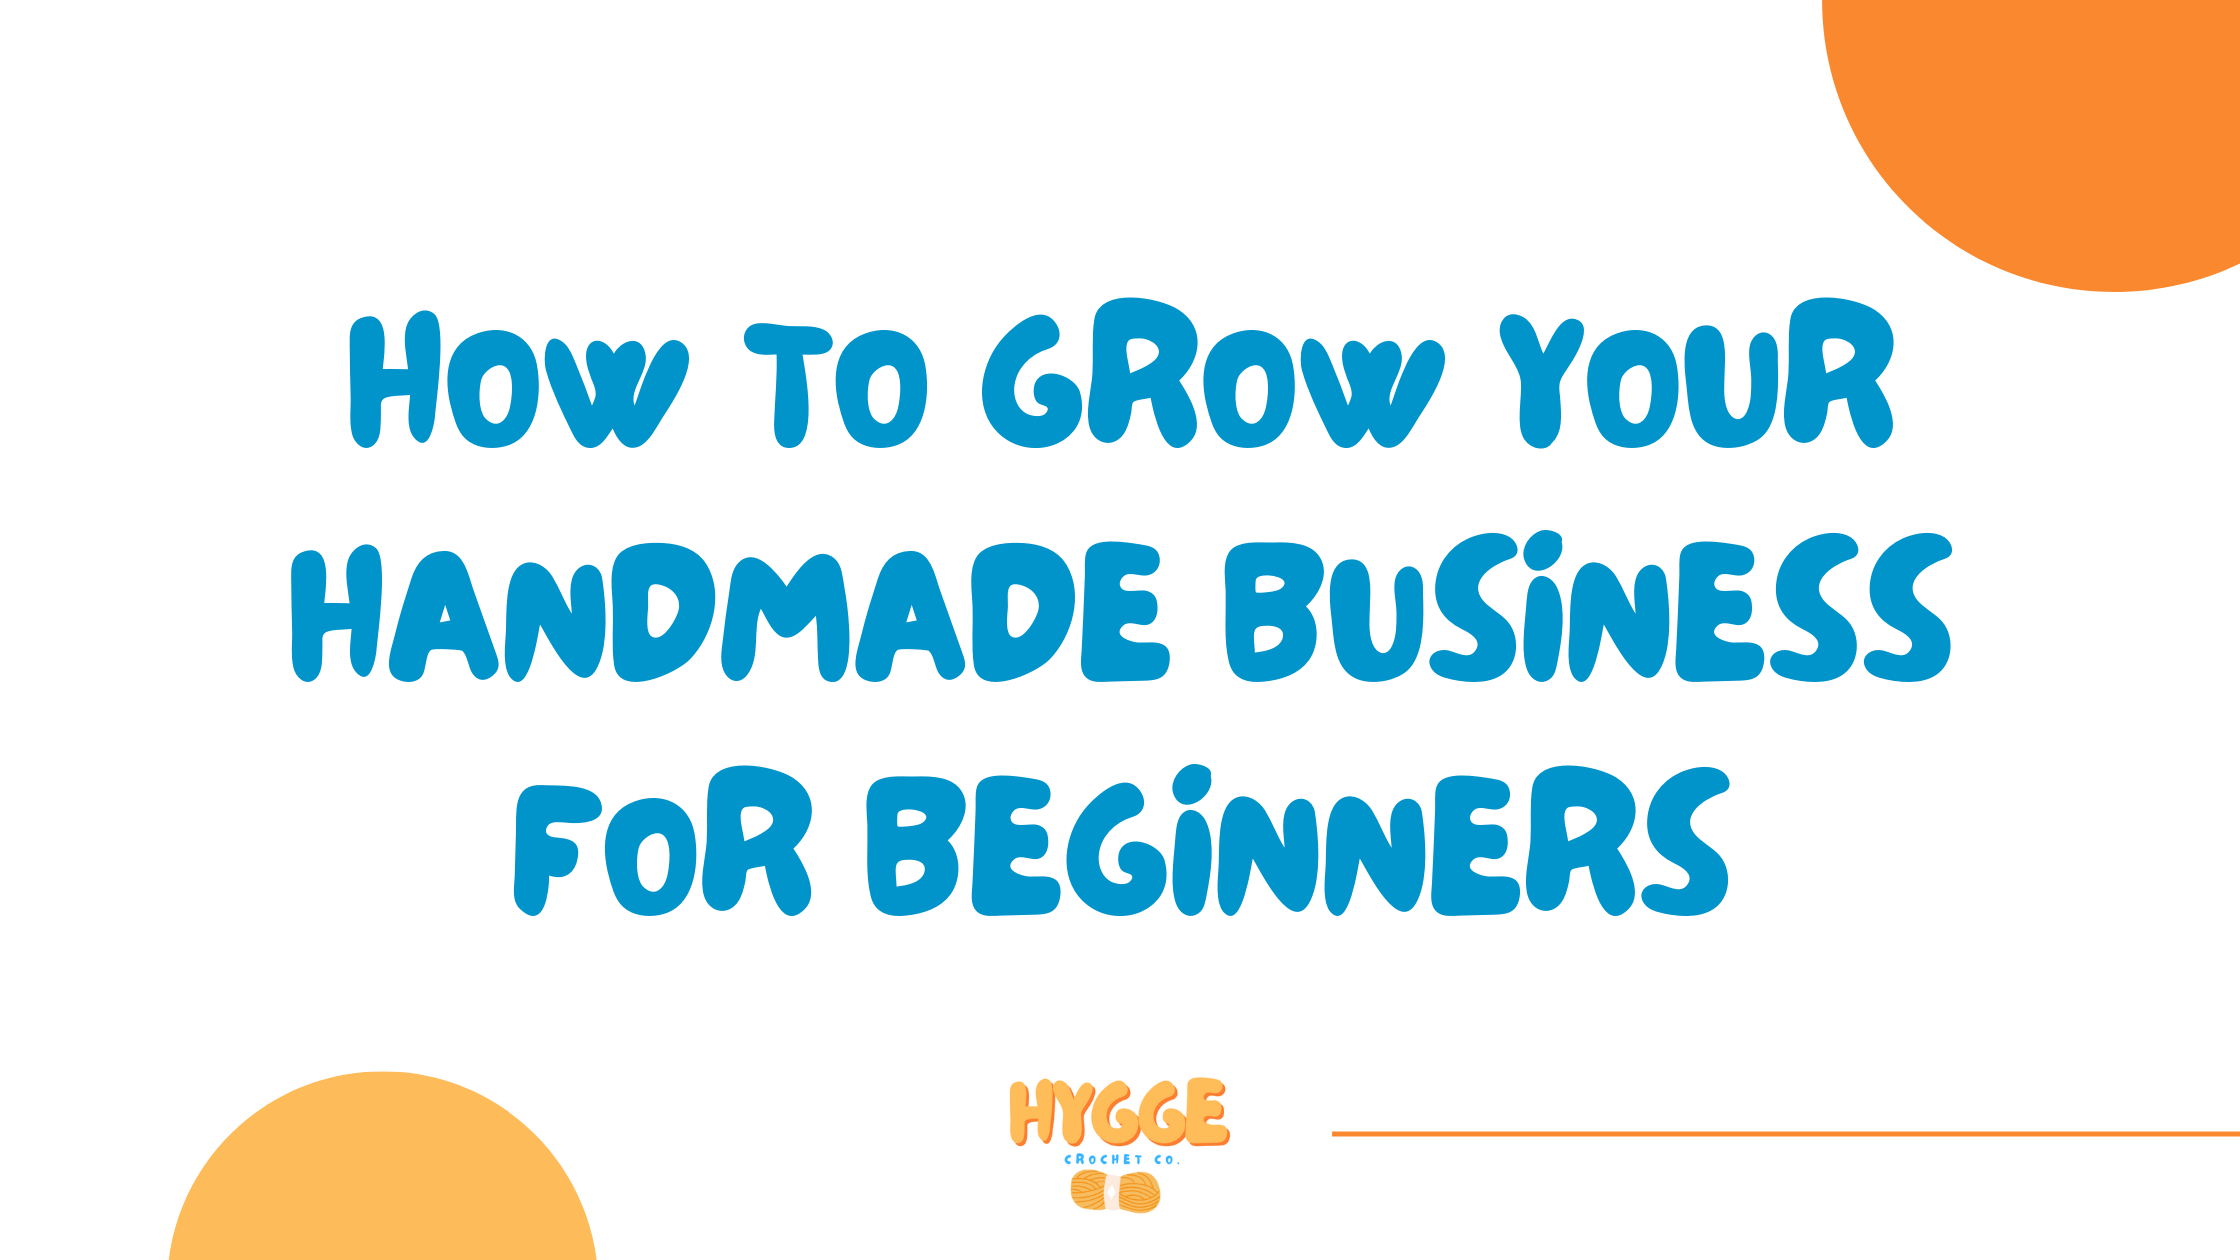 How to Grow Your Handmade Business for Beginners